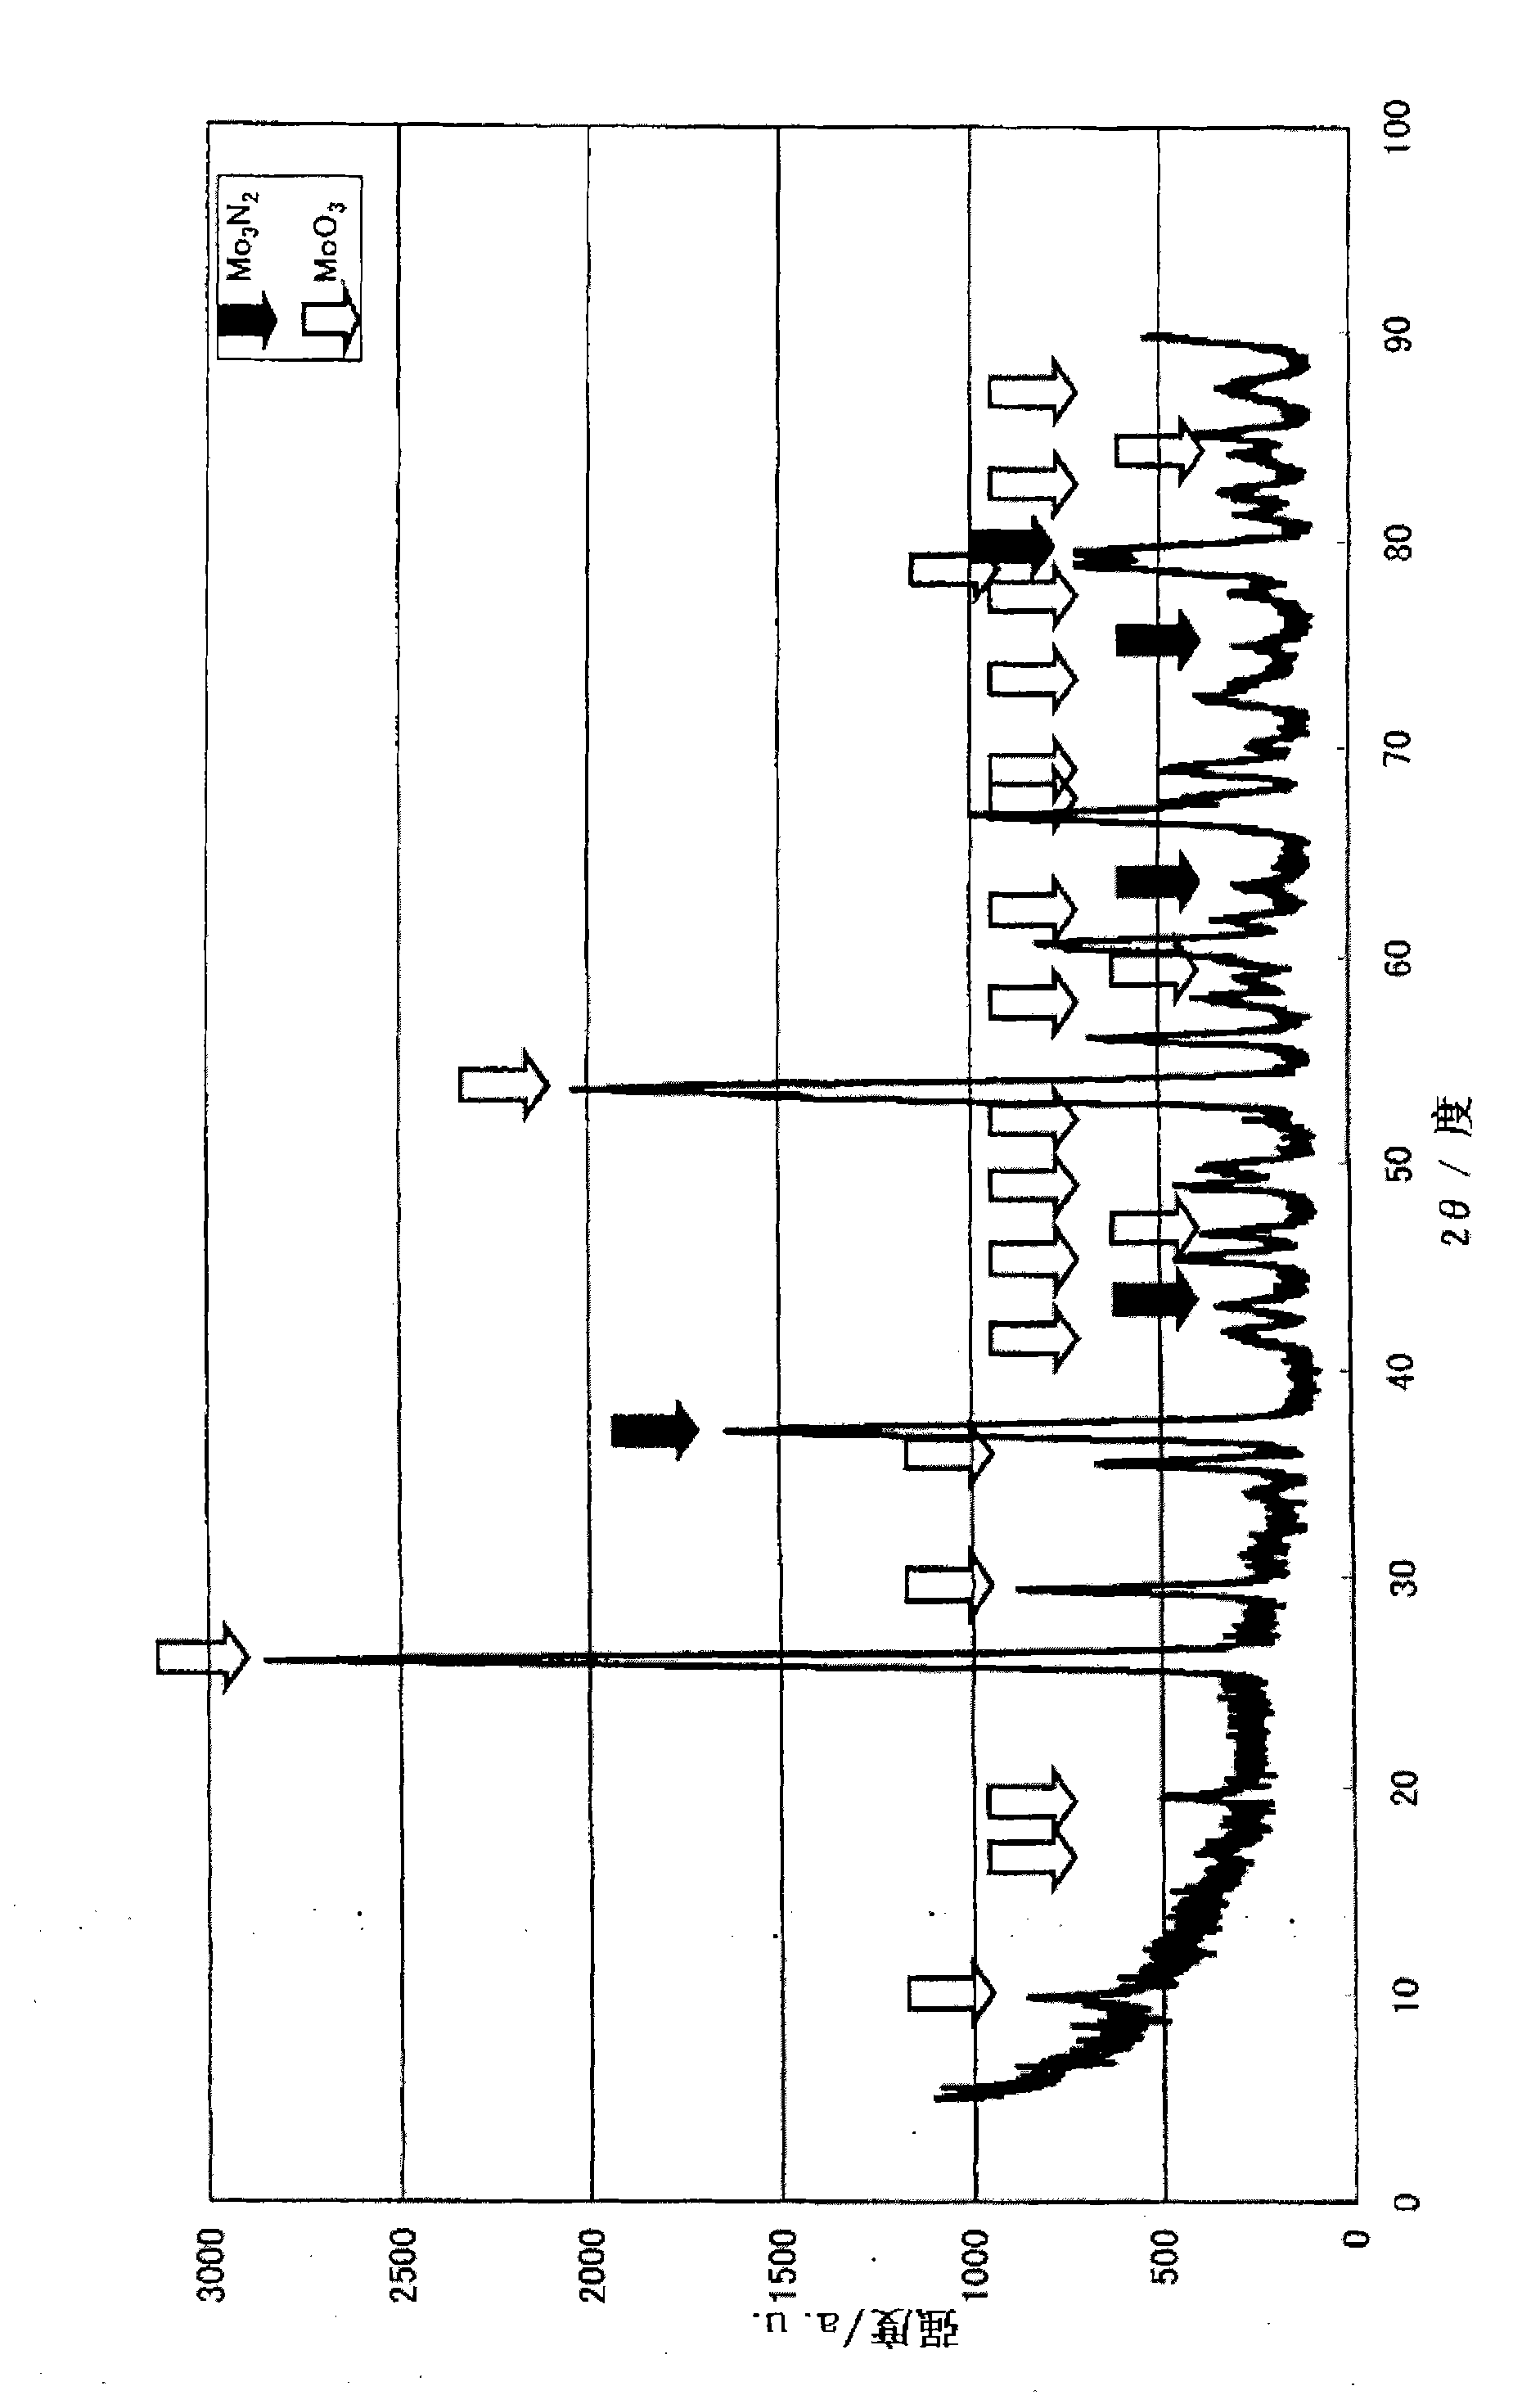 Catalyst for ammonia decomposition, process for producing same, and method of treating ammonia